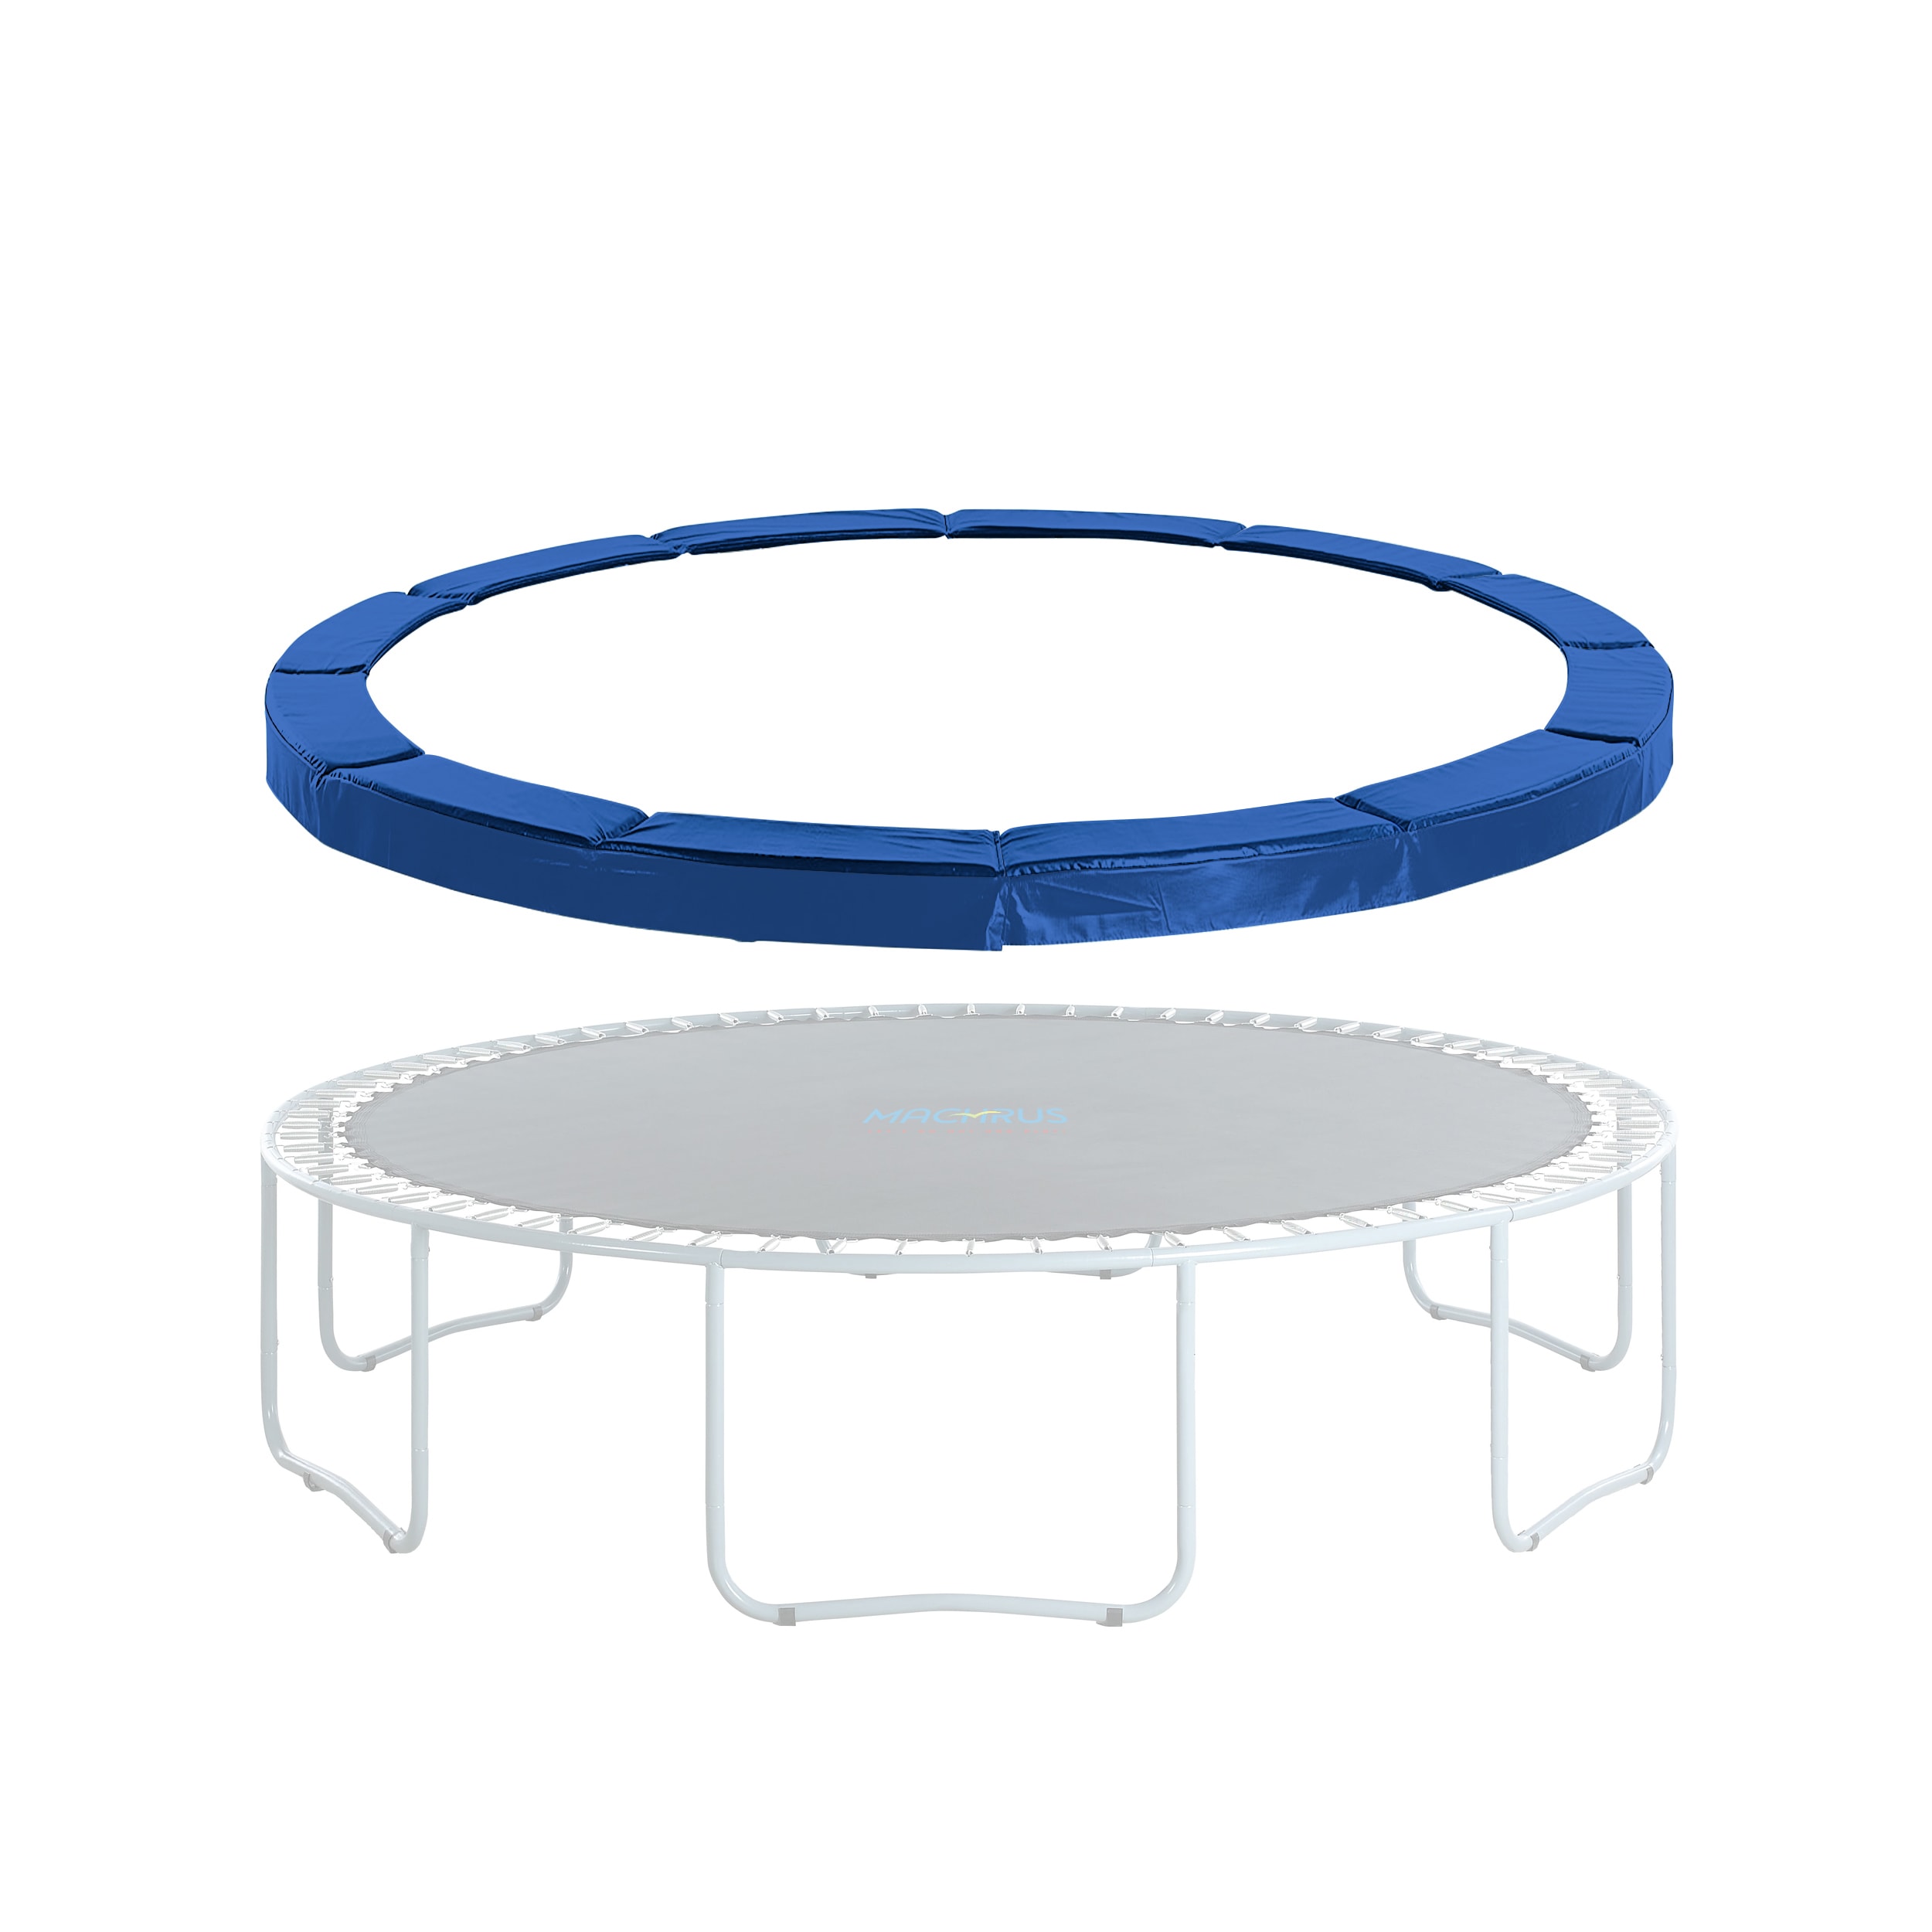 UpperBounce Safety Pad Blue Trampoline Safety in the Accessories at Lowes.com